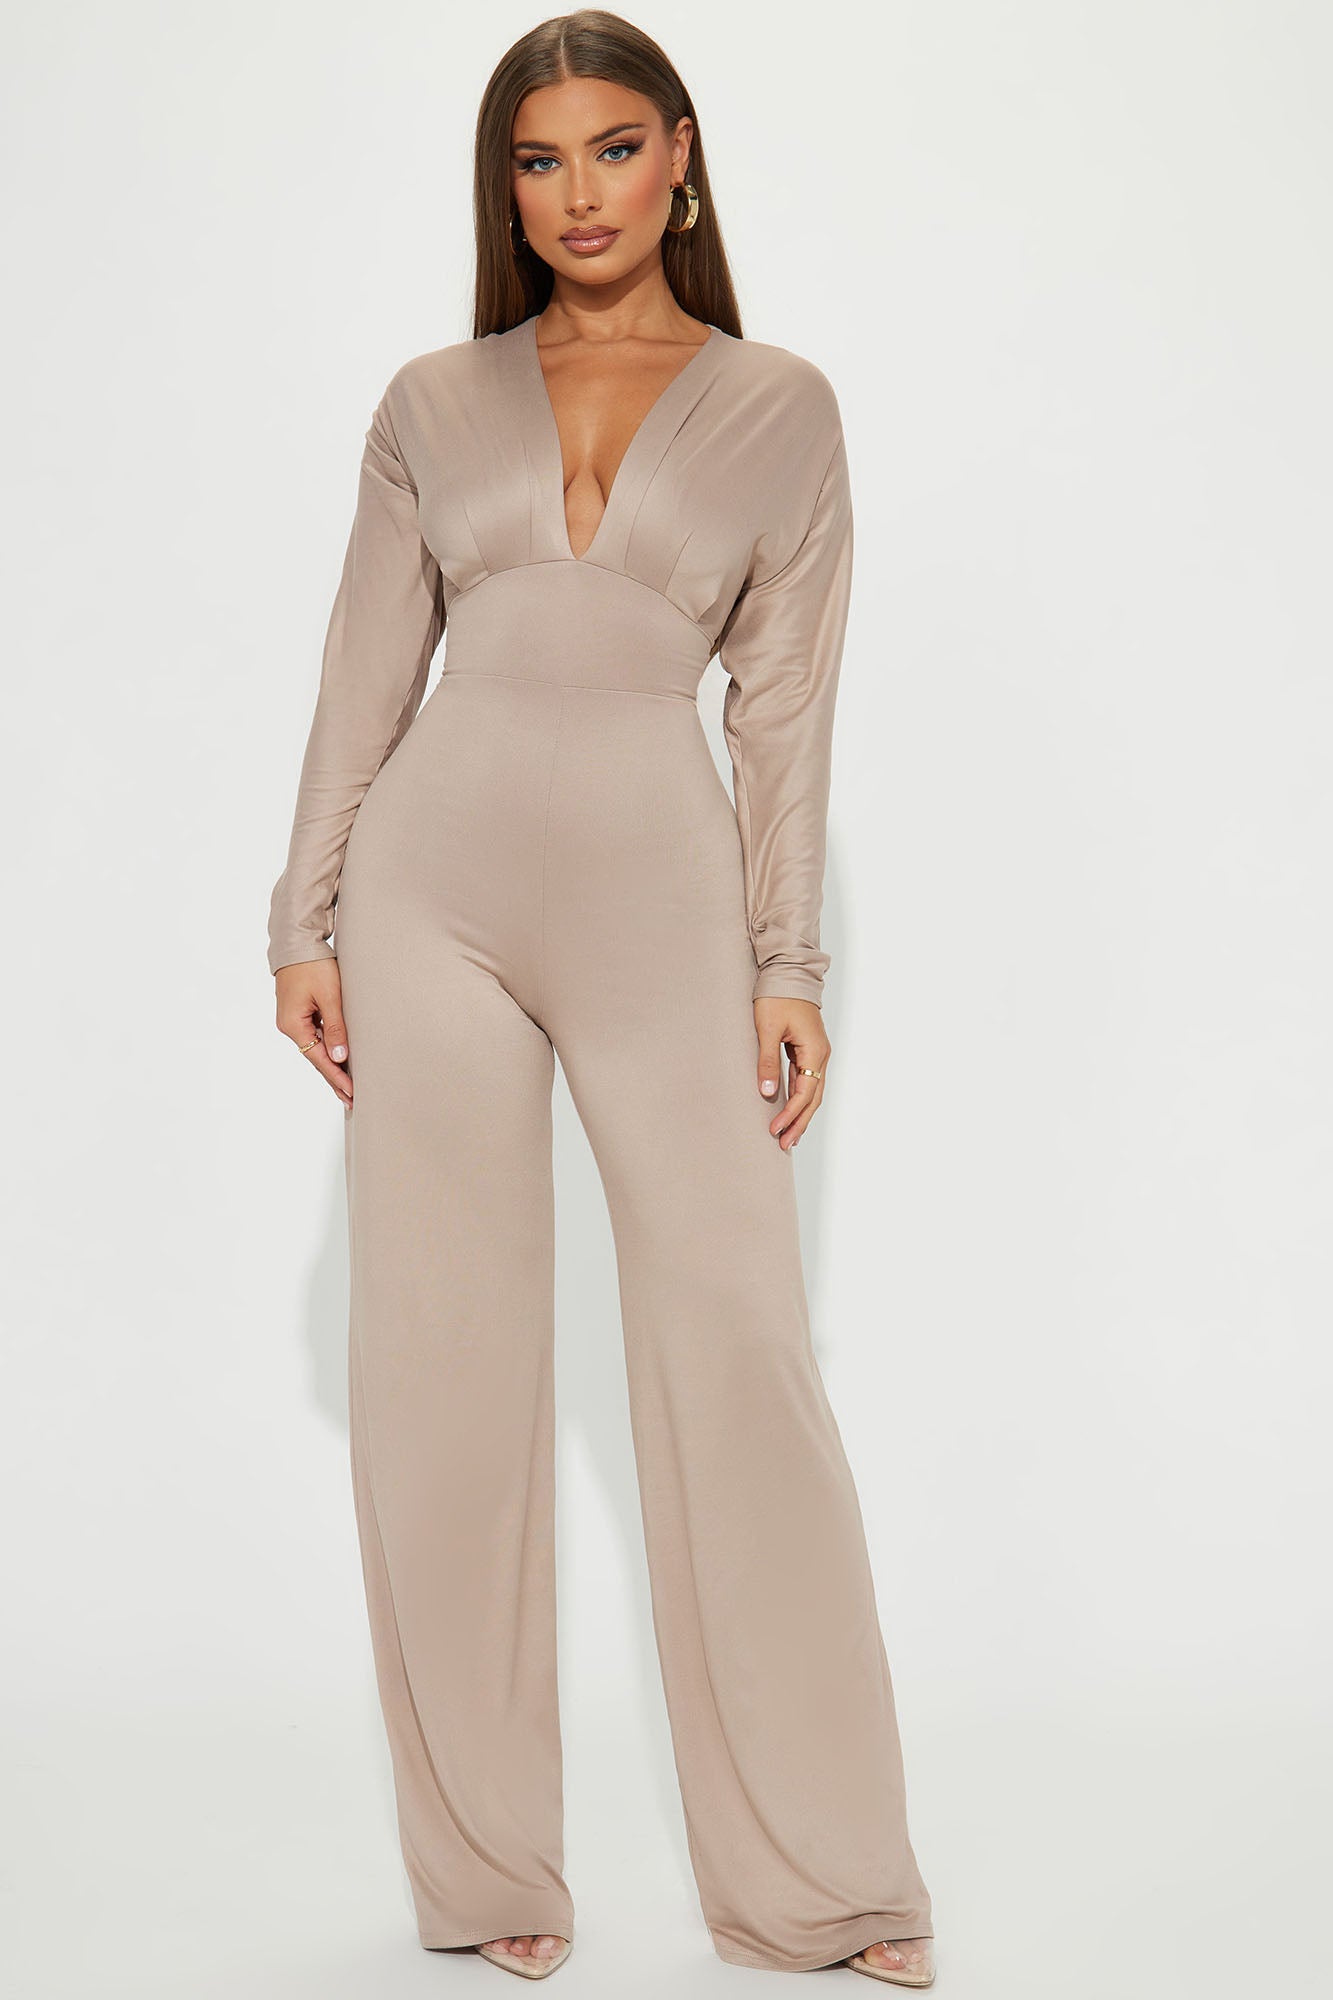 Bail Me Out Jumpsuit - Taupe